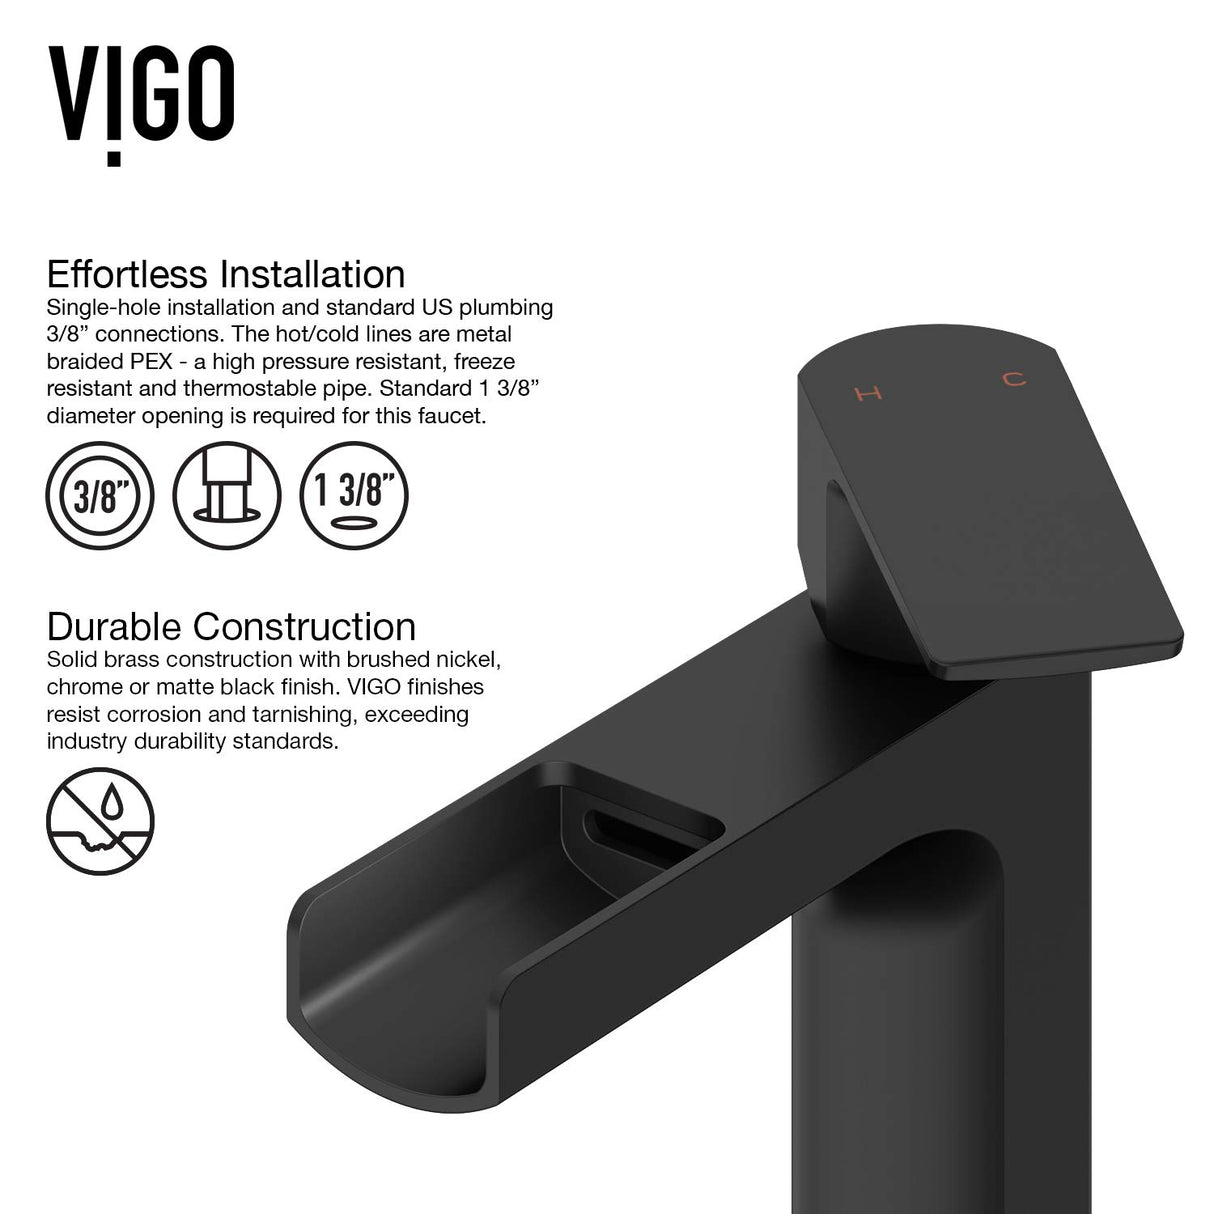 VIGO VGT944 13.88" L -21.25" W -10.38" H Handmade Countertop White Matte Stone Rectangle Vessel Bathroom Sink Set in Matte White Finish with Matte Black Waterfall Faucet and Pop Up Drain